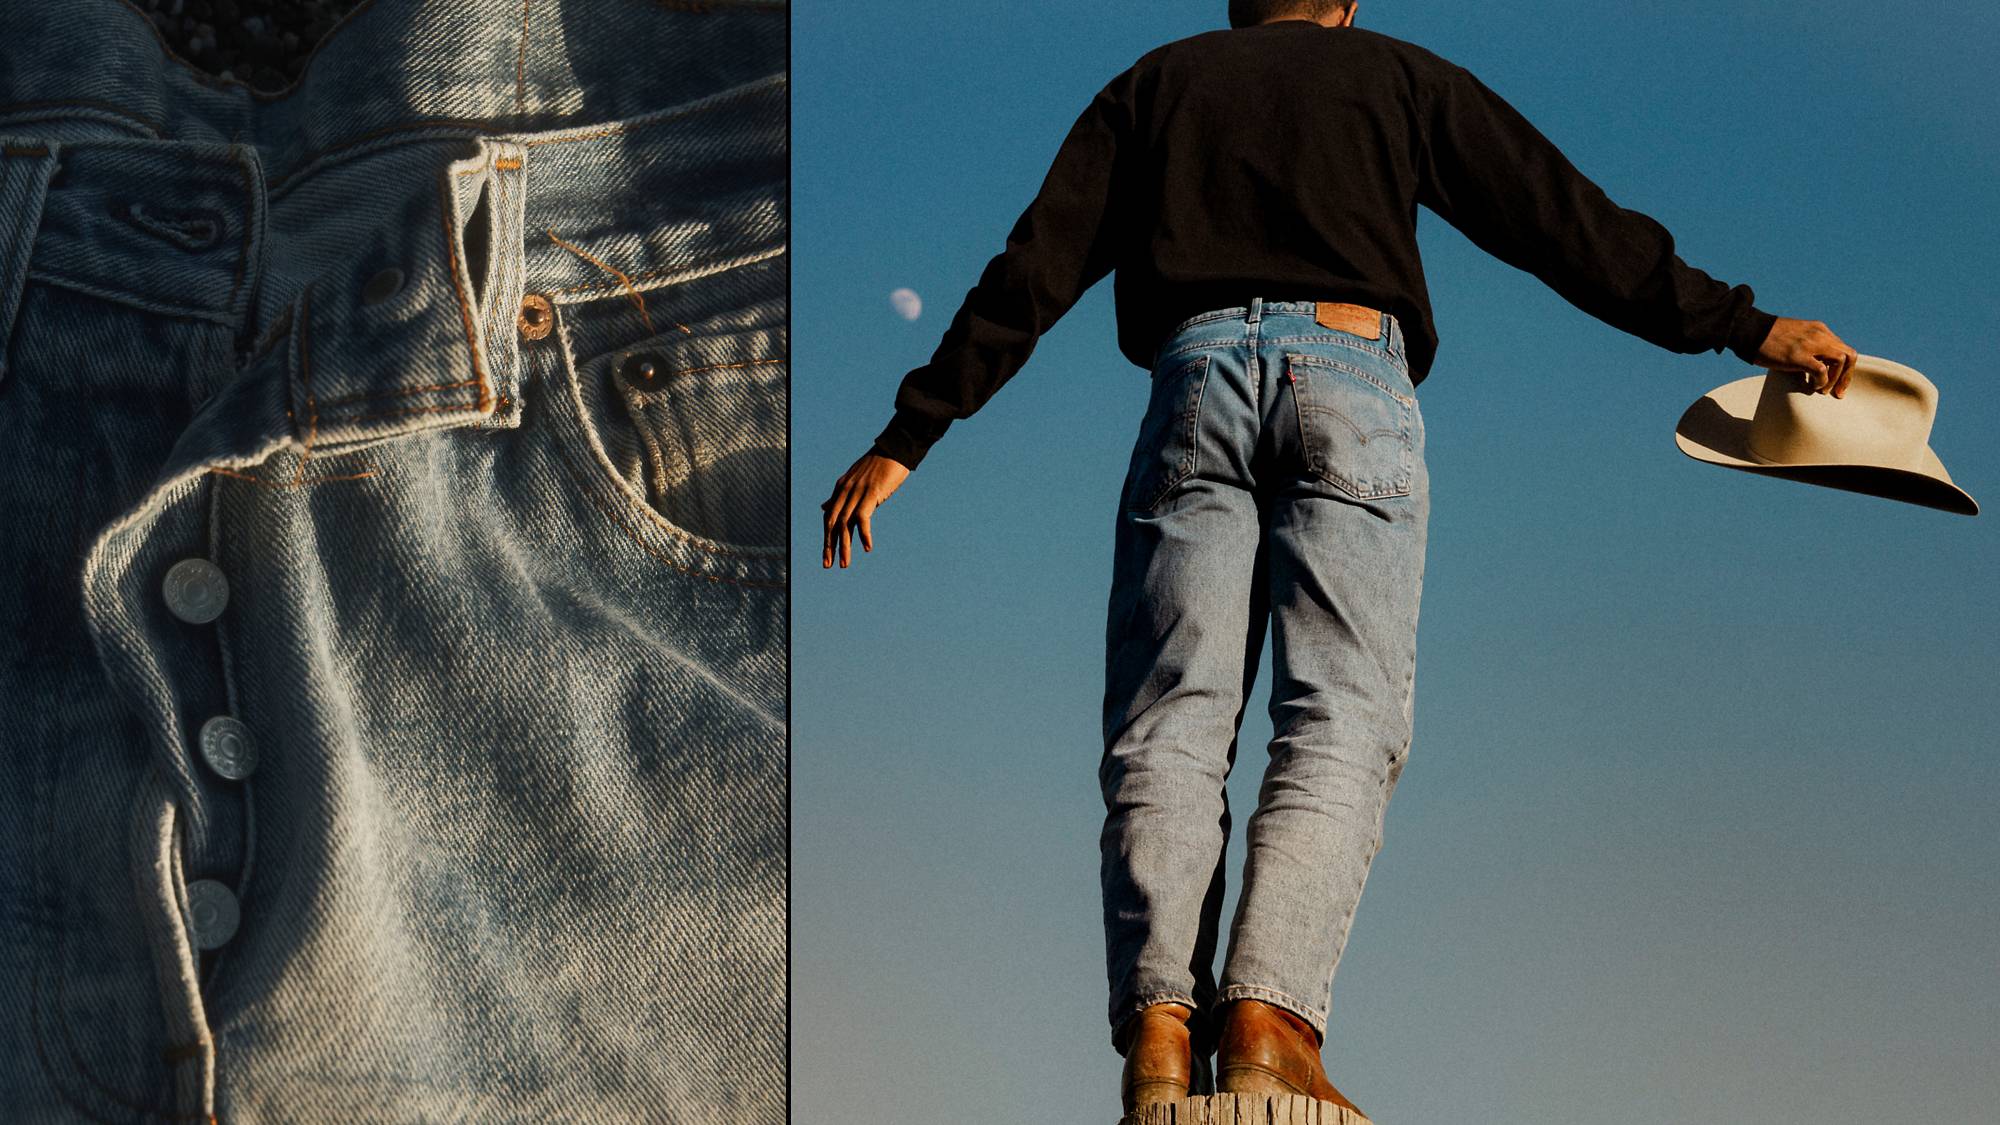 Men's Jeans Fit Guide - Types of Jean Fits & Styles for Men